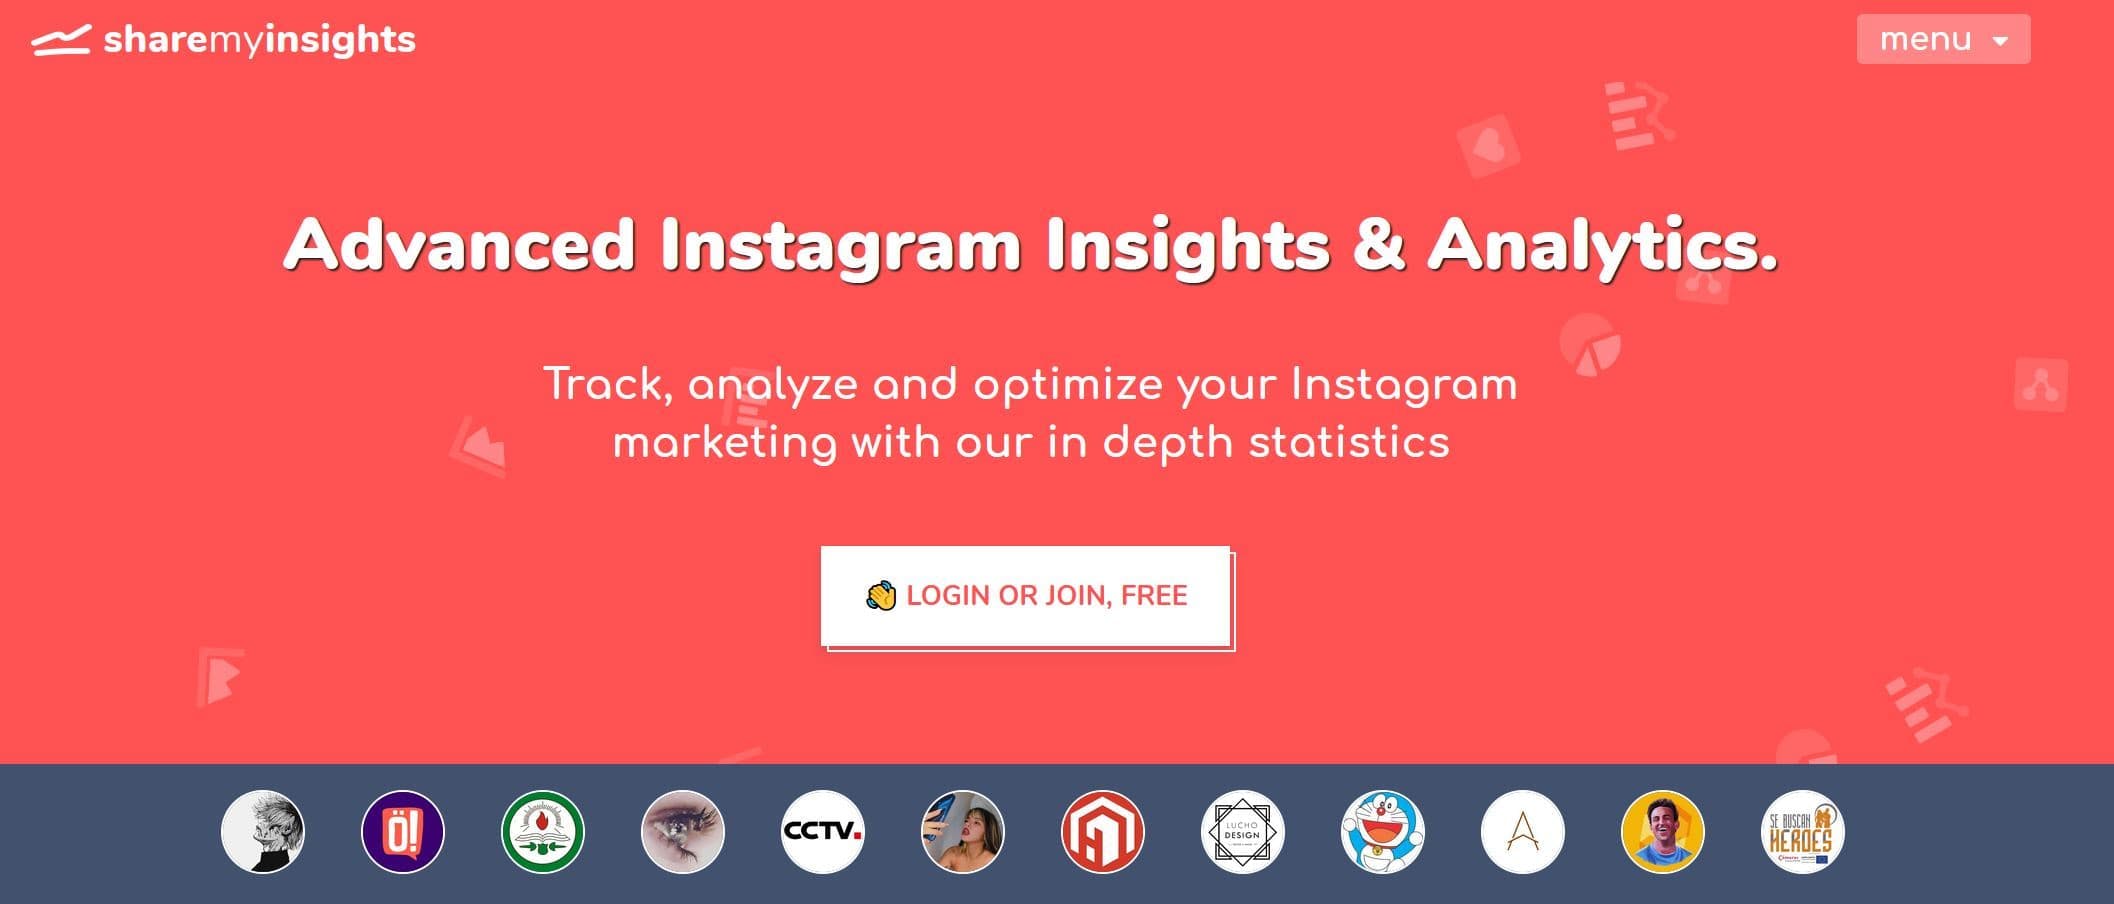 Share my insights Instagram insights